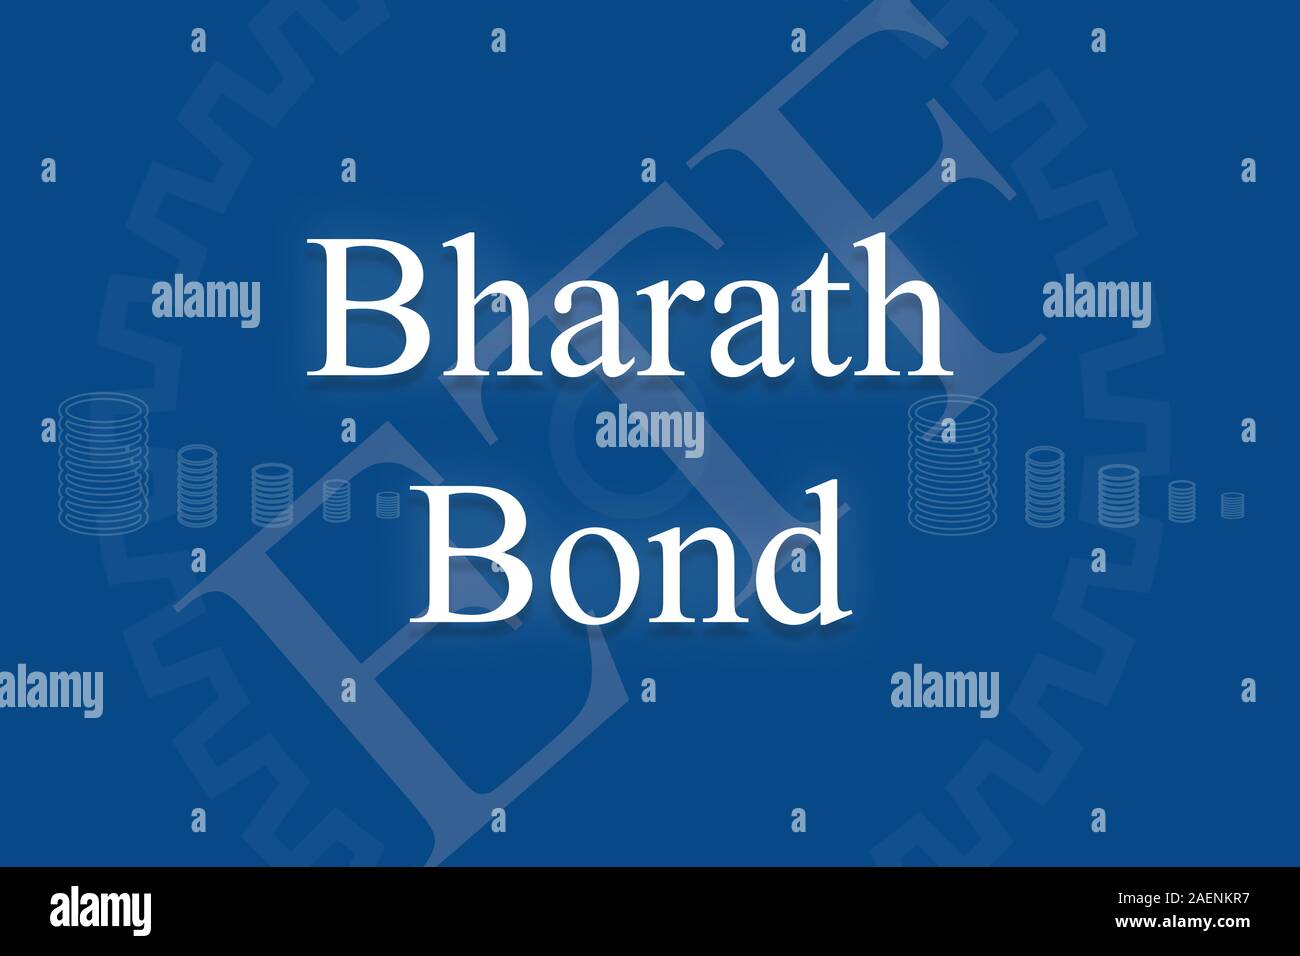 Bhatath Bond an ETF or Exchange Traded Fund on Blue background with stack of coins Stock Photo